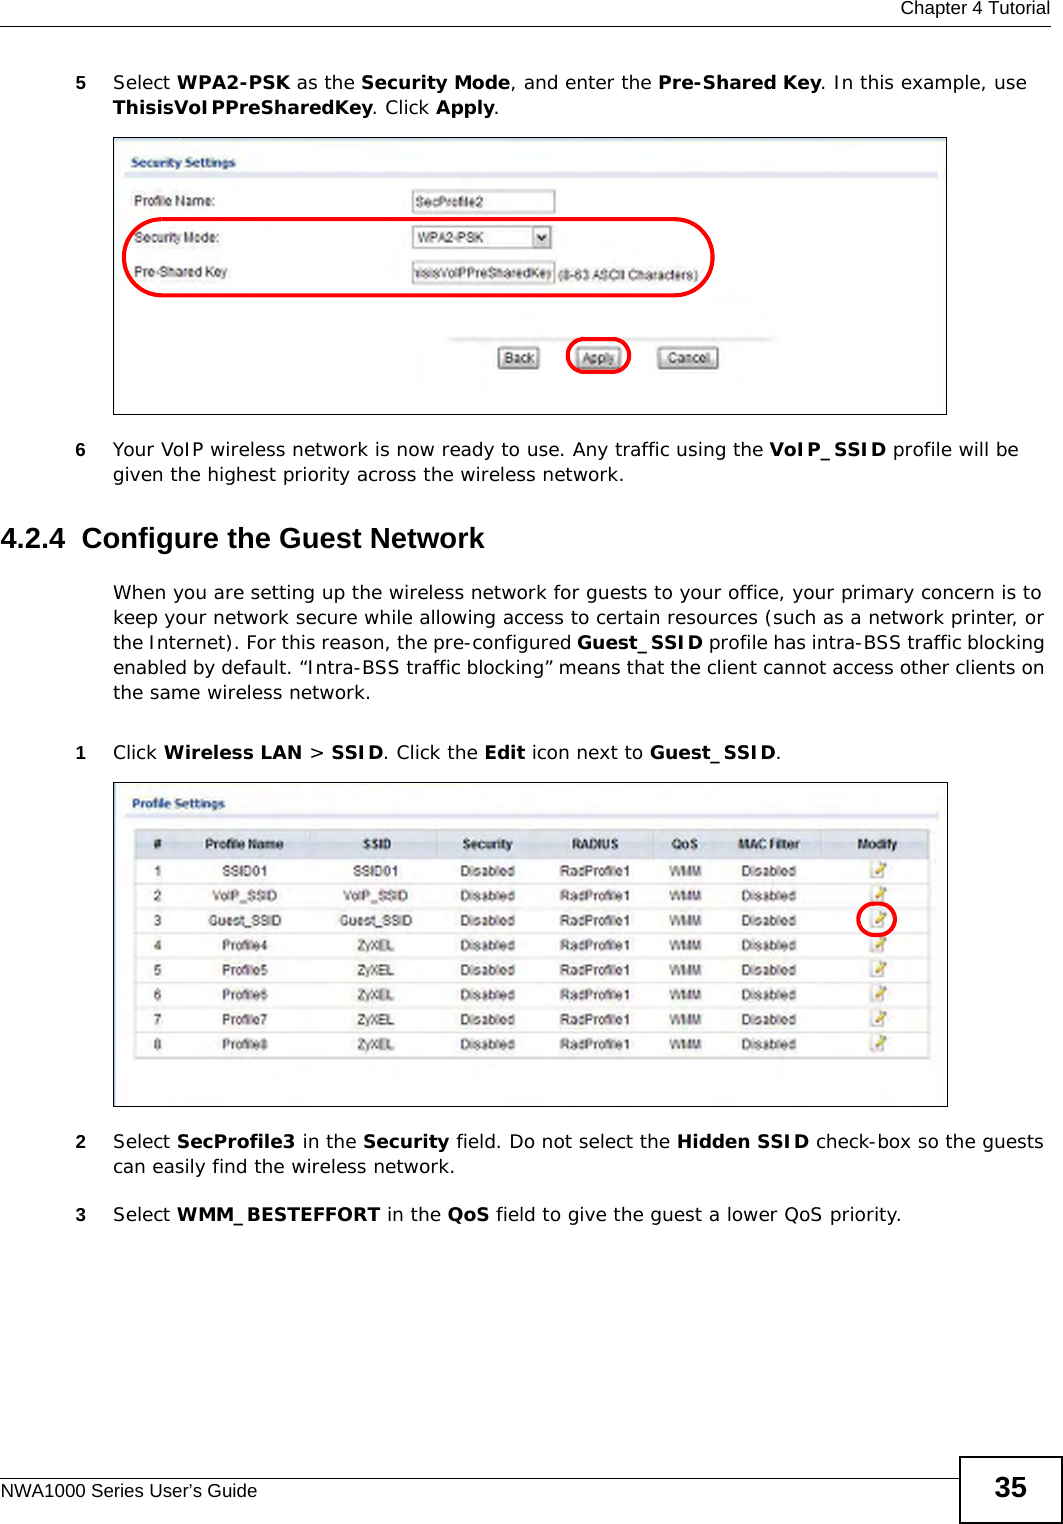  Chapter 4 TutorialNWA1000 Series User’s Guide 355Select WPA2-PSK as the Security Mode, and enter the Pre-Shared Key. In this example, use ThisisVoIPPreSharedKey. Click Apply. 6Your VoIP wireless network is now ready to use. Any traffic using the VoIP_SSID profile will be given the highest priority across the wireless network.4.2.4  Configure the Guest NetworkWhen you are setting up the wireless network for guests to your office, your primary concern is to keep your network secure while allowing access to certain resources (such as a network printer, or the Internet). For this reason, the pre-configured Guest_SSID profile has intra-BSS traffic blocking enabled by default. “Intra-BSS traffic blocking” means that the client cannot access other clients on the same wireless network.1Click Wireless LAN &gt; SSID. Click the Edit icon next to Guest_SSID. 2Select SecProfile3 in the Security field. Do not select the Hidden SSID check-box so the guests can easily find the wireless network. 3Select WMM_BESTEFFORT in the QoS field to give the guest a lower QoS priority. 